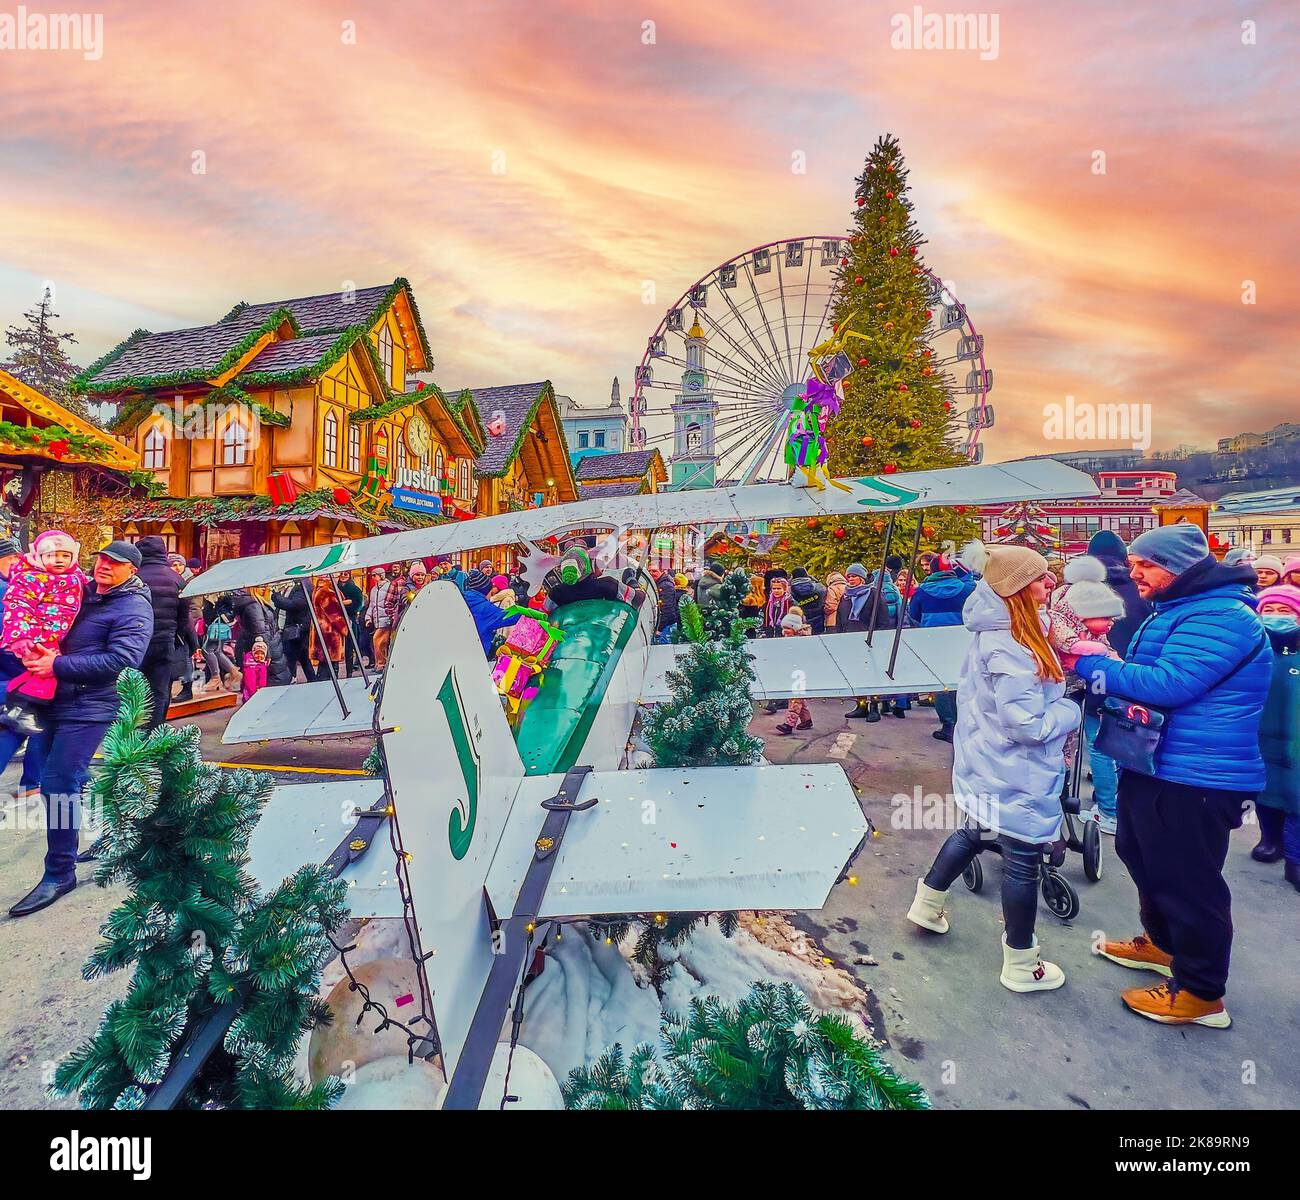 KYIV, UKRAINE - JANUARY 2, 2022: The Christmas Market on the Square of Contracts is a popular destination among locals and tourists, on January 2 in K Stock Photo